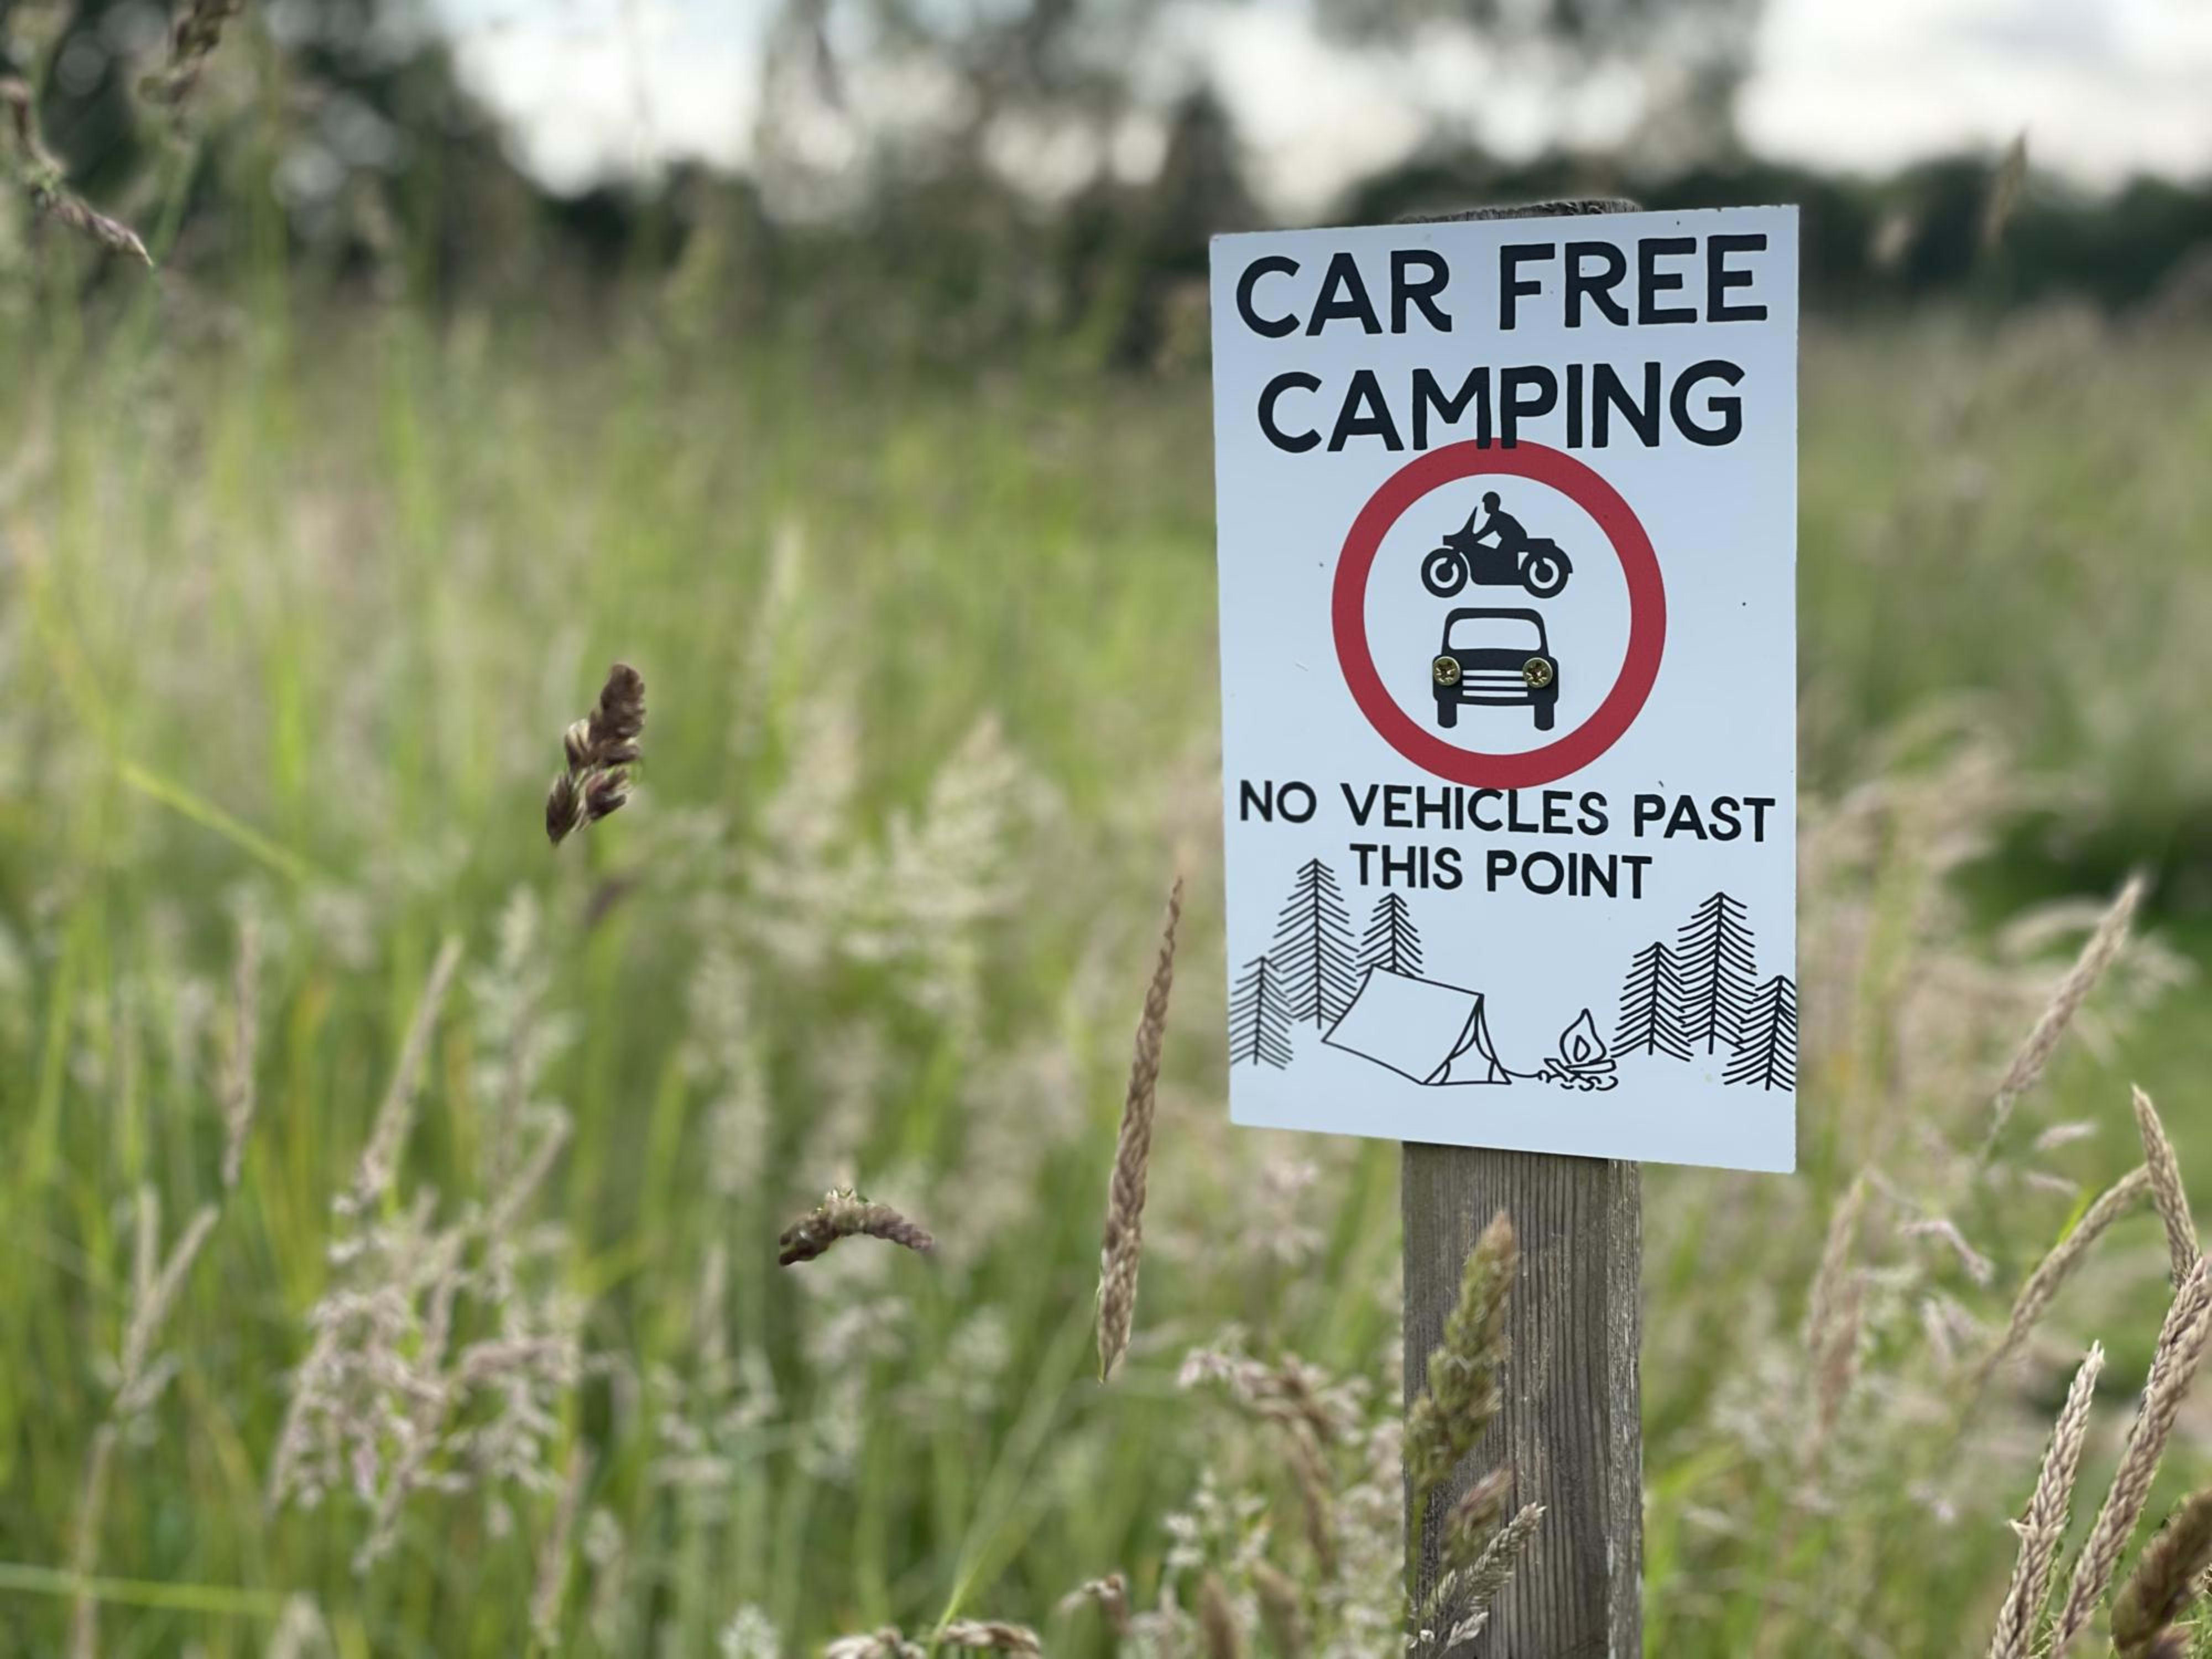 Car Free Camping sign on a campsite in Norfolk